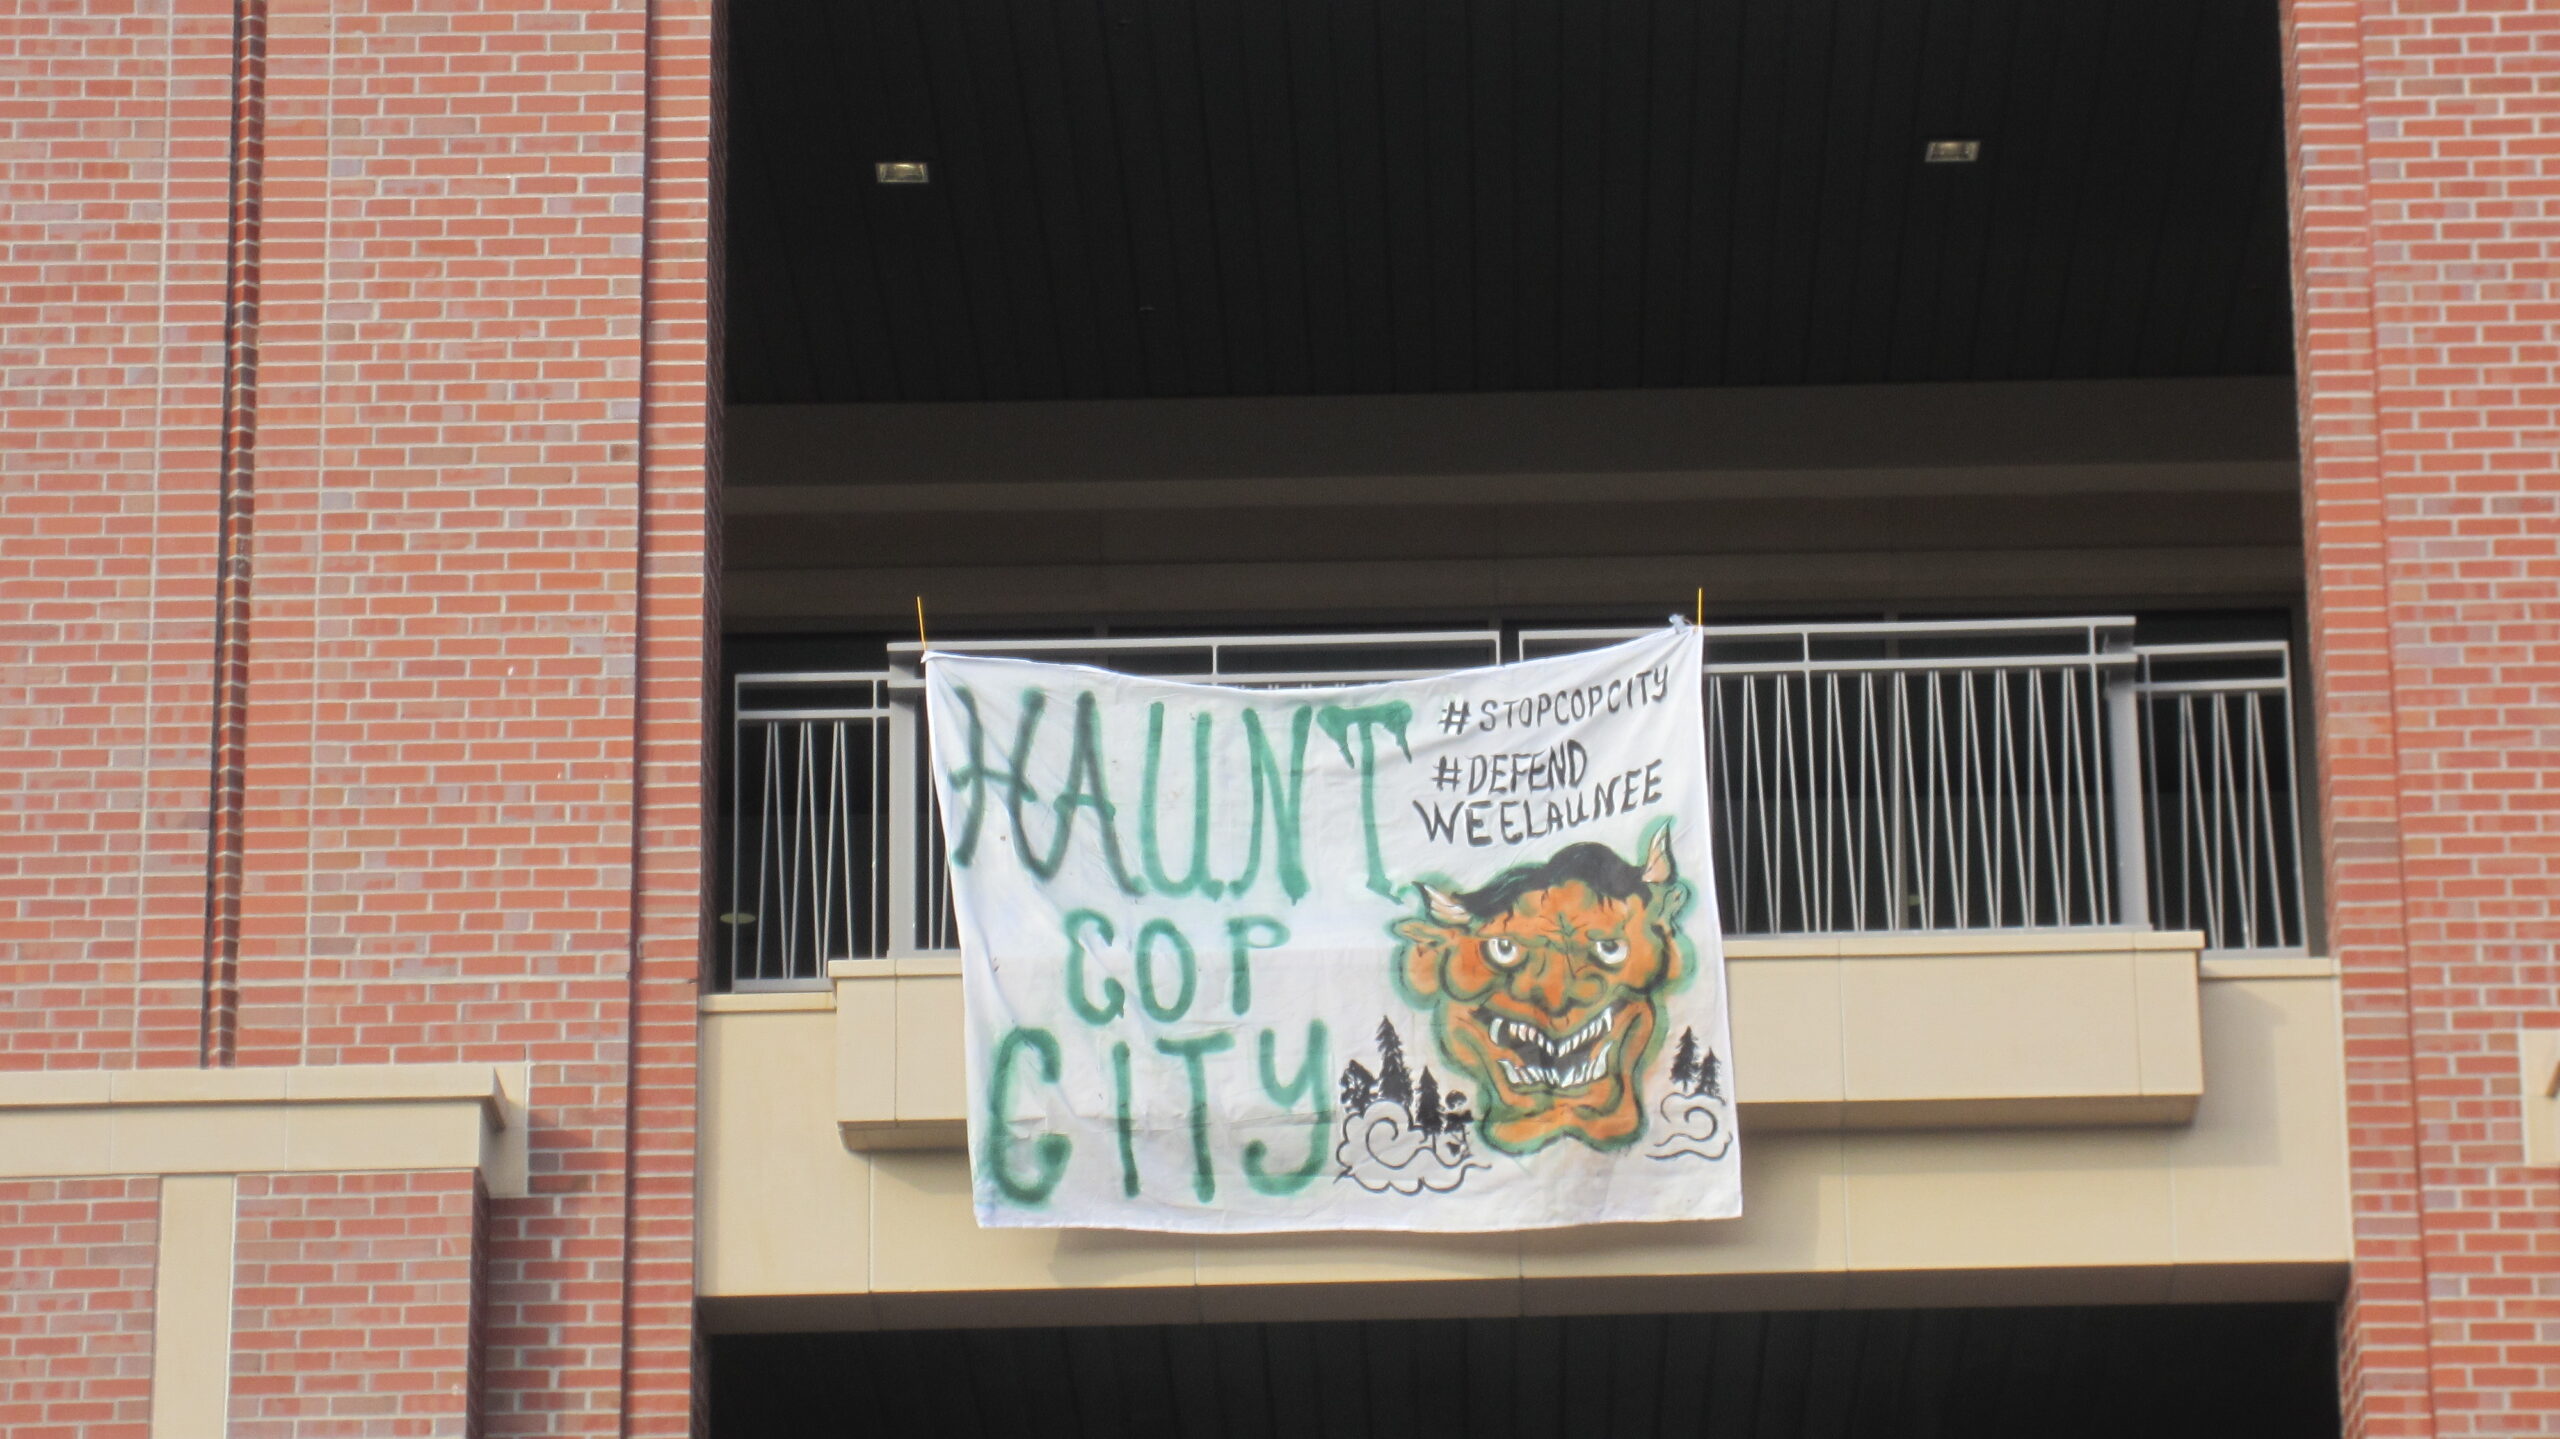 A banner hung on a railing reads "HAUNT COP CITY" in big green letters and "#stopcopcity, #defendweelaunee in smaller black letters. A Hannya mask face with trees and wind are depicted below it.